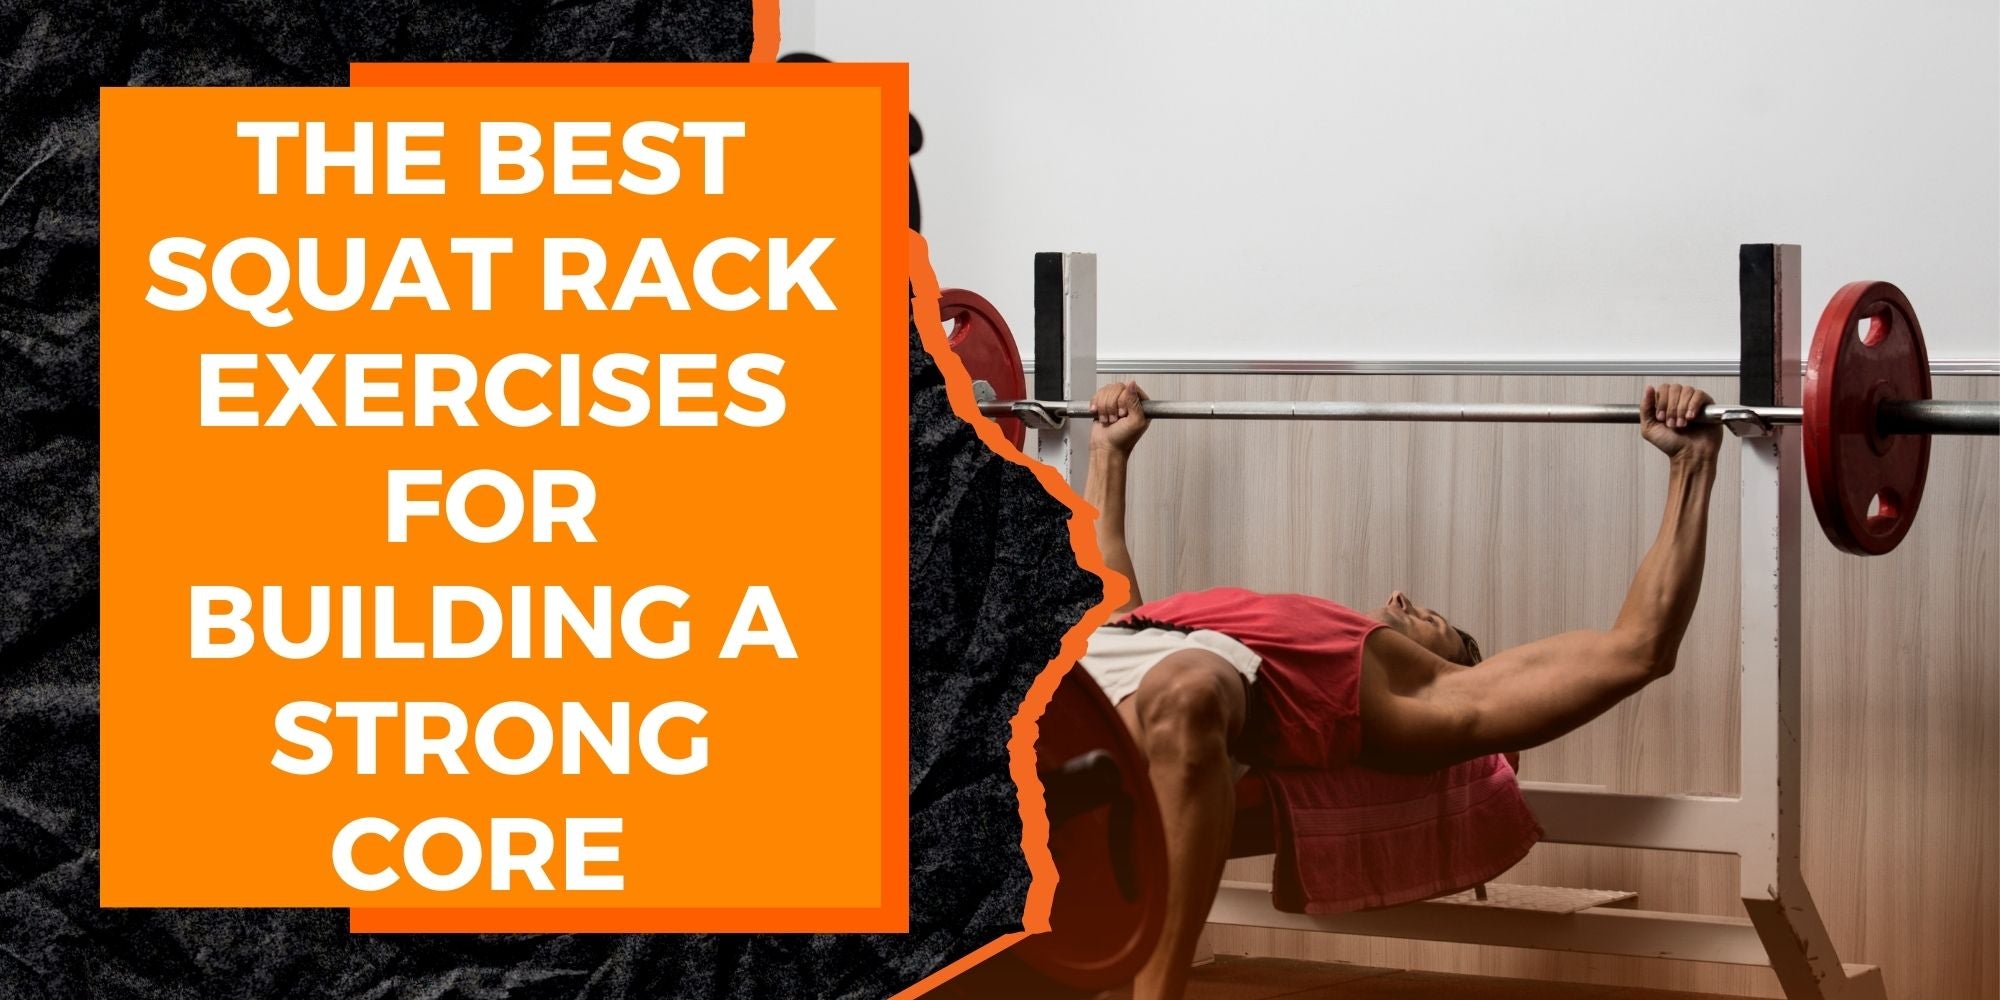 The Best Squat Rack Exercises for Building a Strong Core